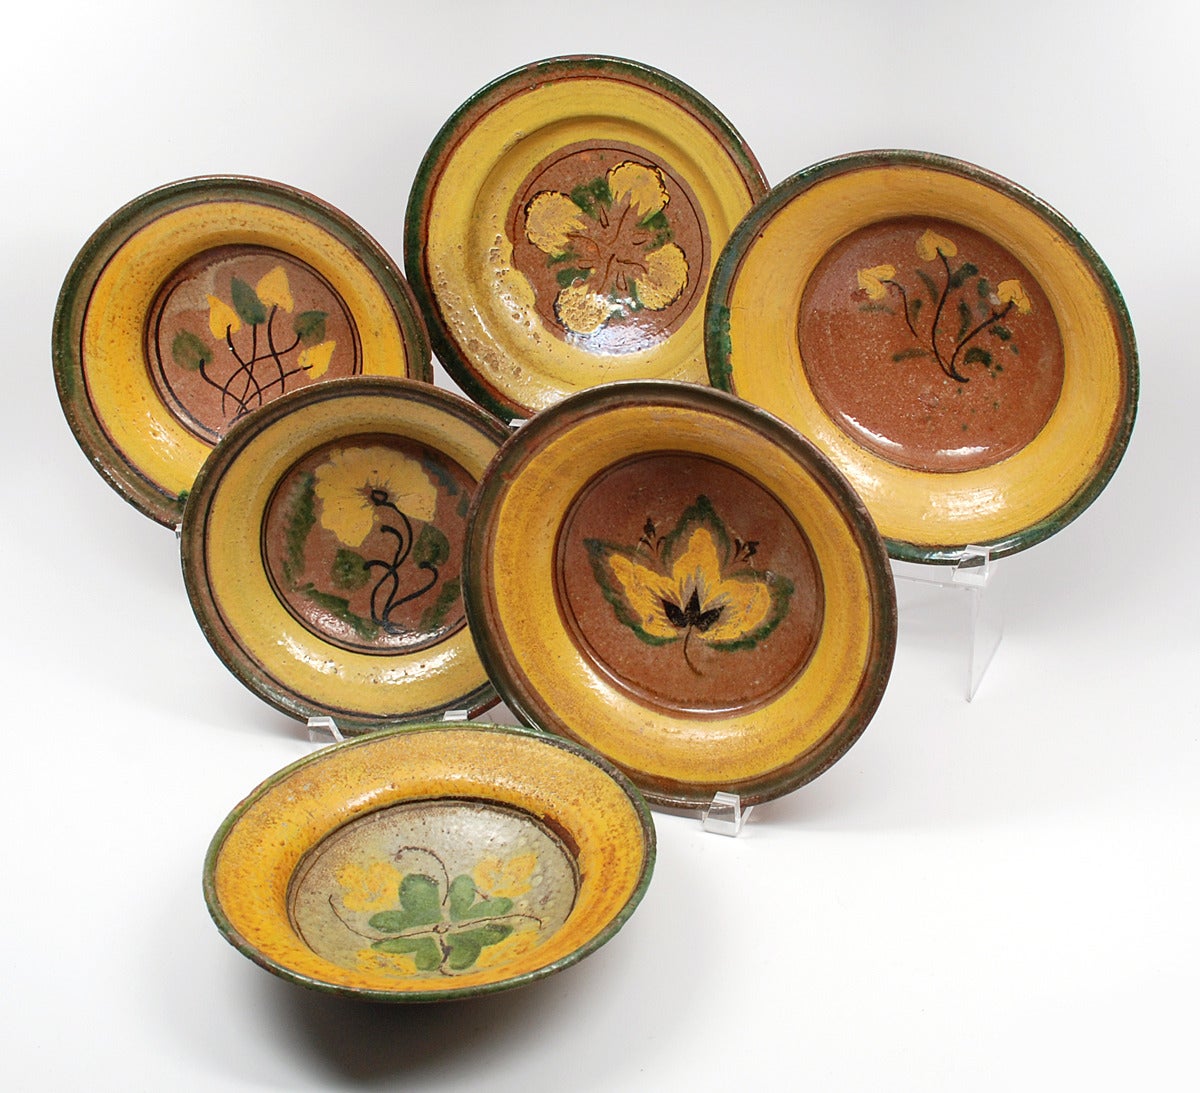 A collection of six turn of the 20th century Guatemalan Majolica plates from the Montiel Family Studio in Antigua, Guatemala. Each plate with whimsical foliate motifs surrounded by colorful yellow and green borders. 

Dimensions: largest measures